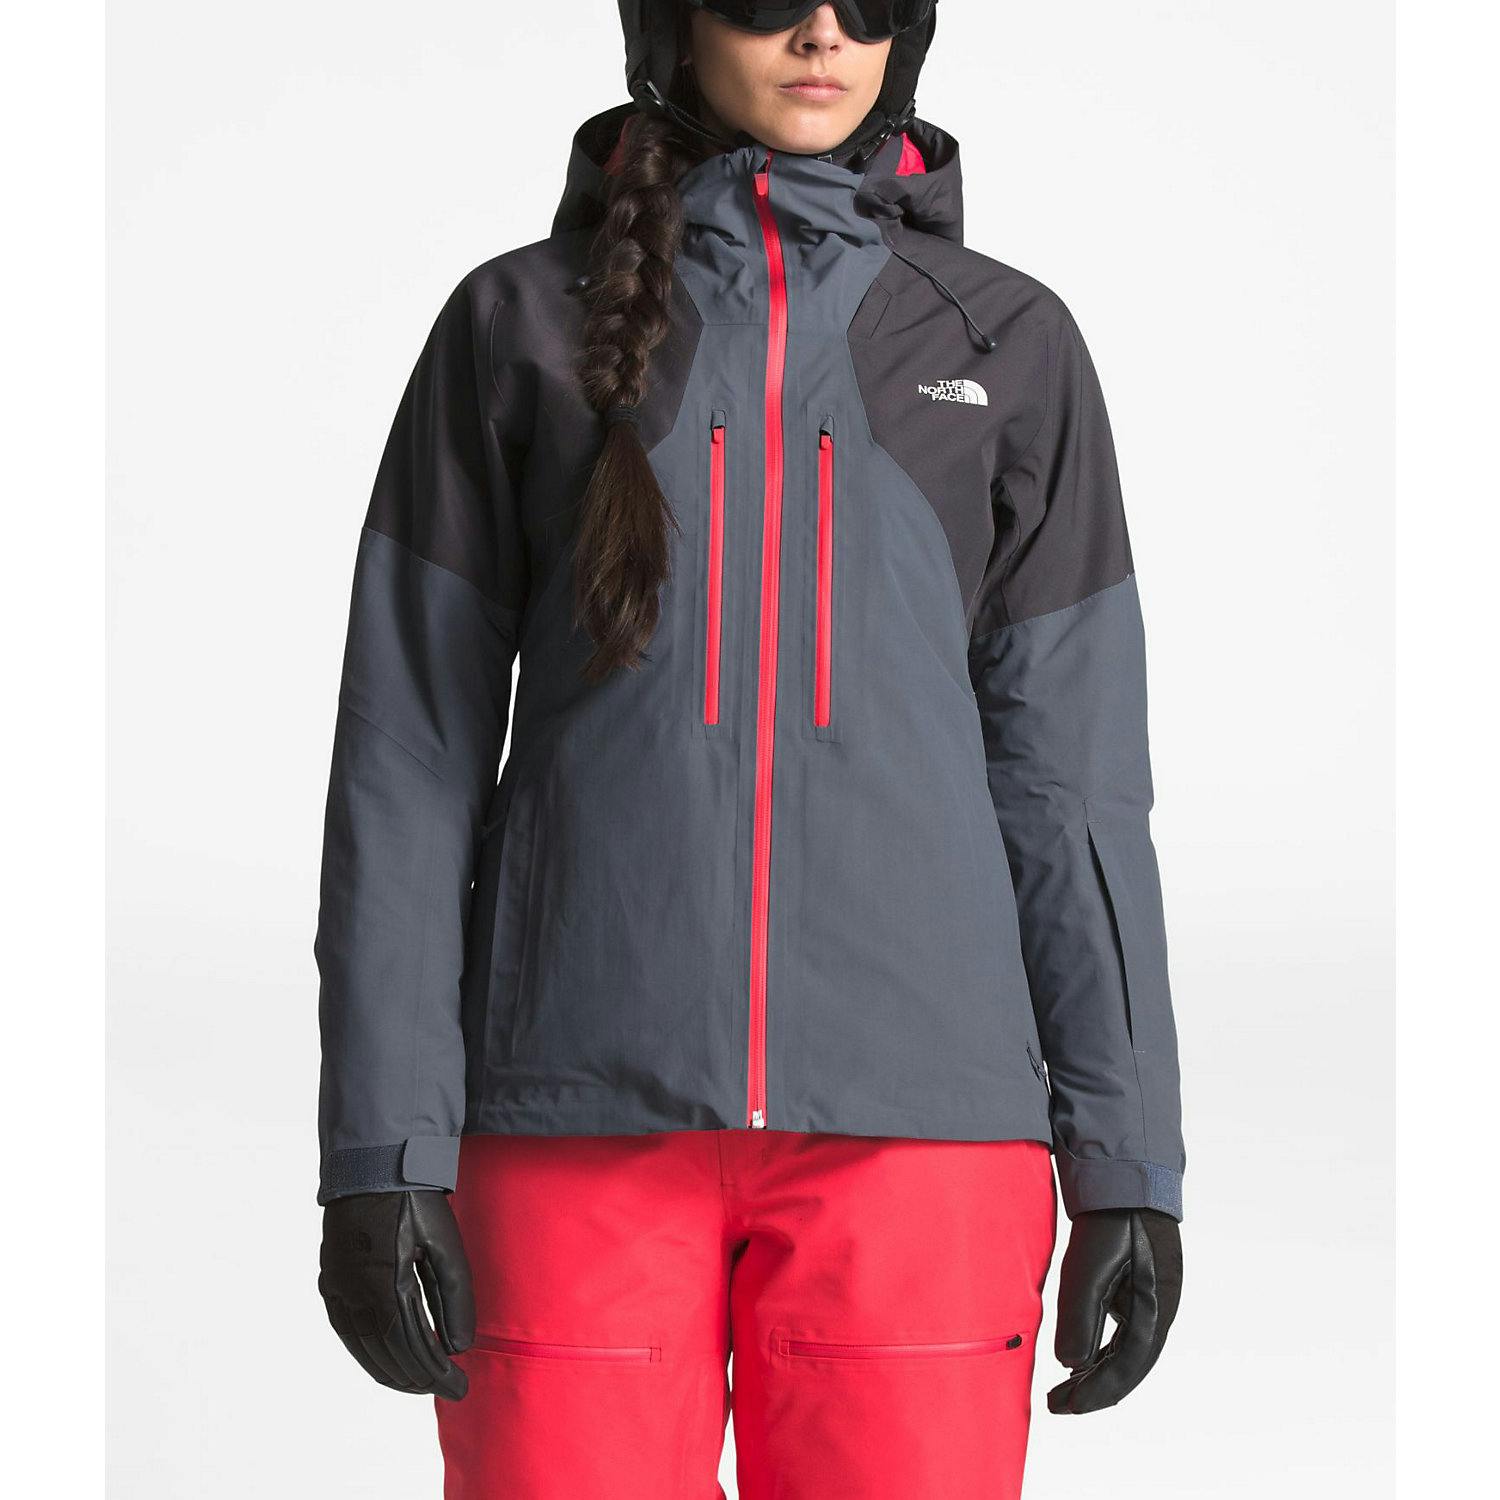 The North Face Women's Powder Guide Shell Jacket